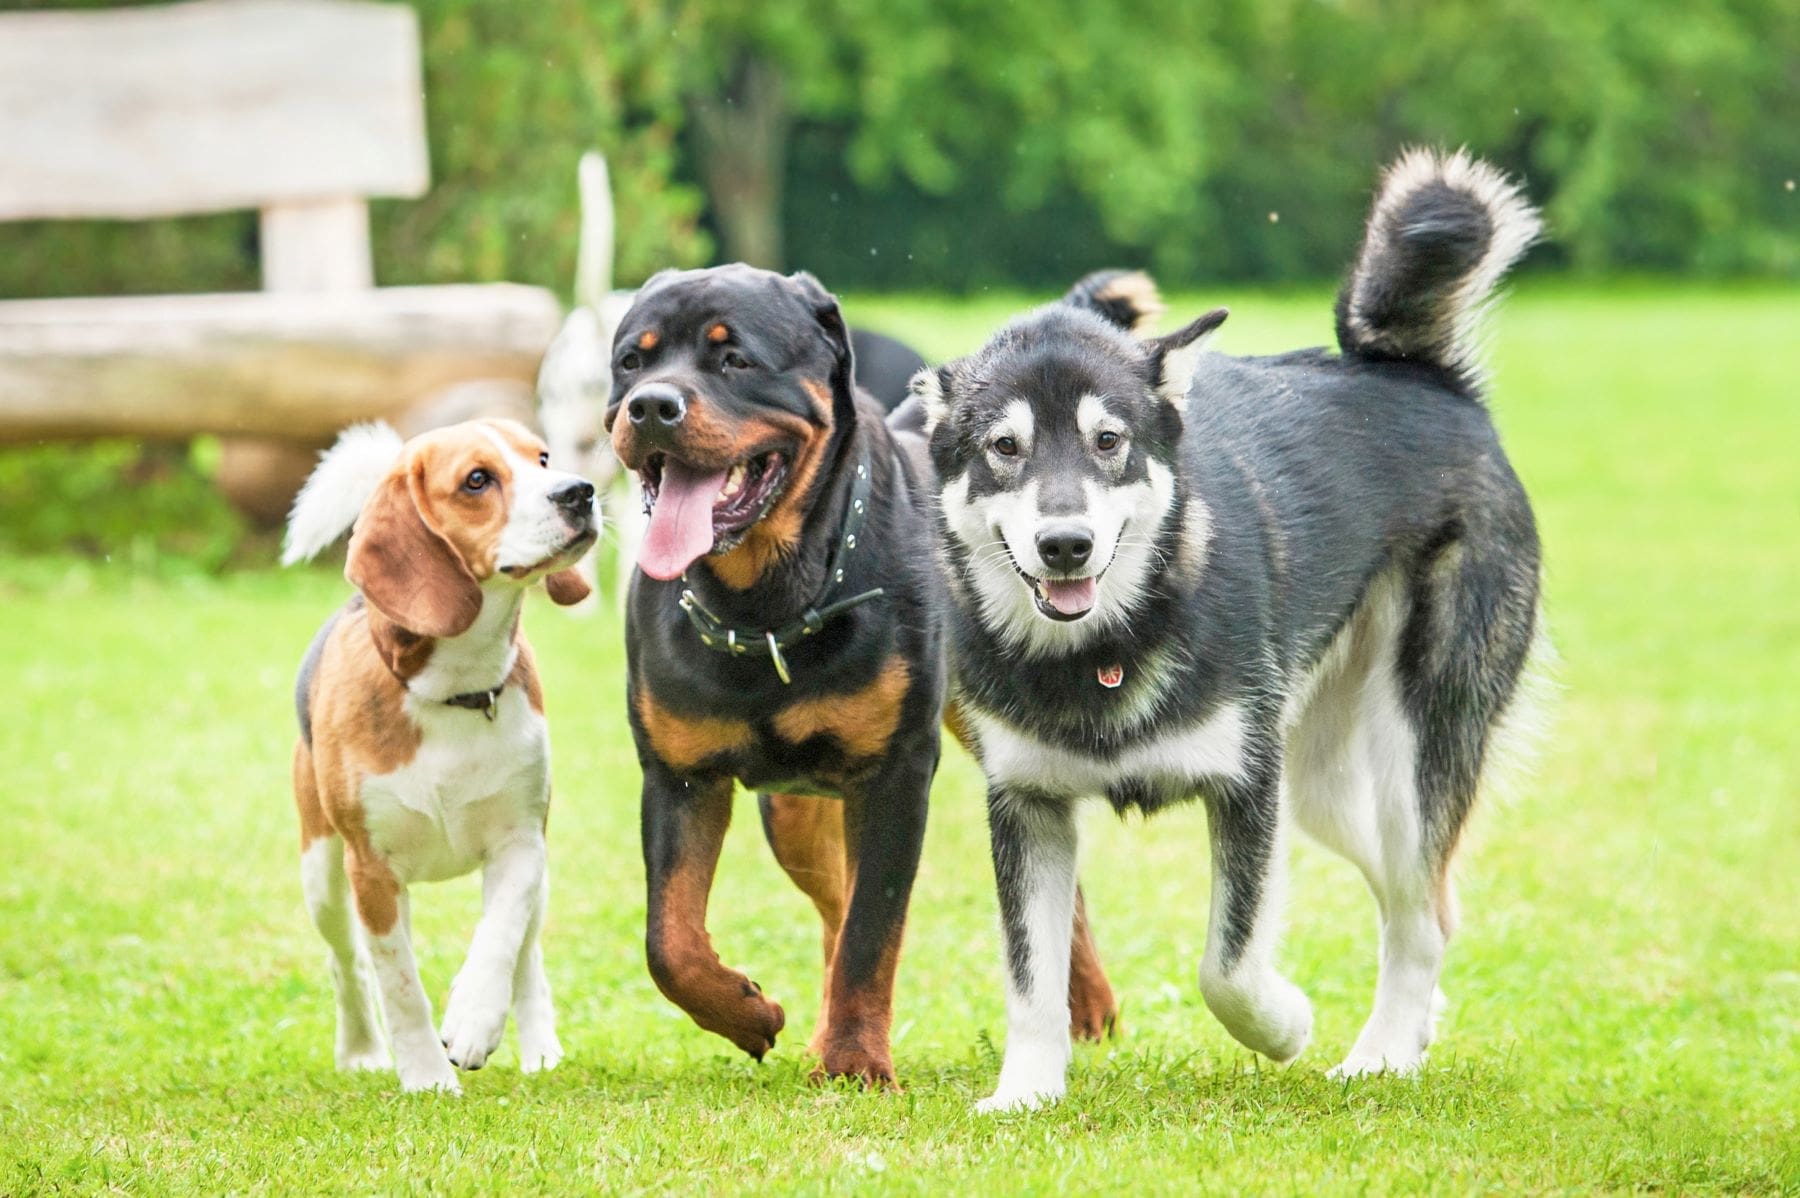 Three dogs walking together in an open field